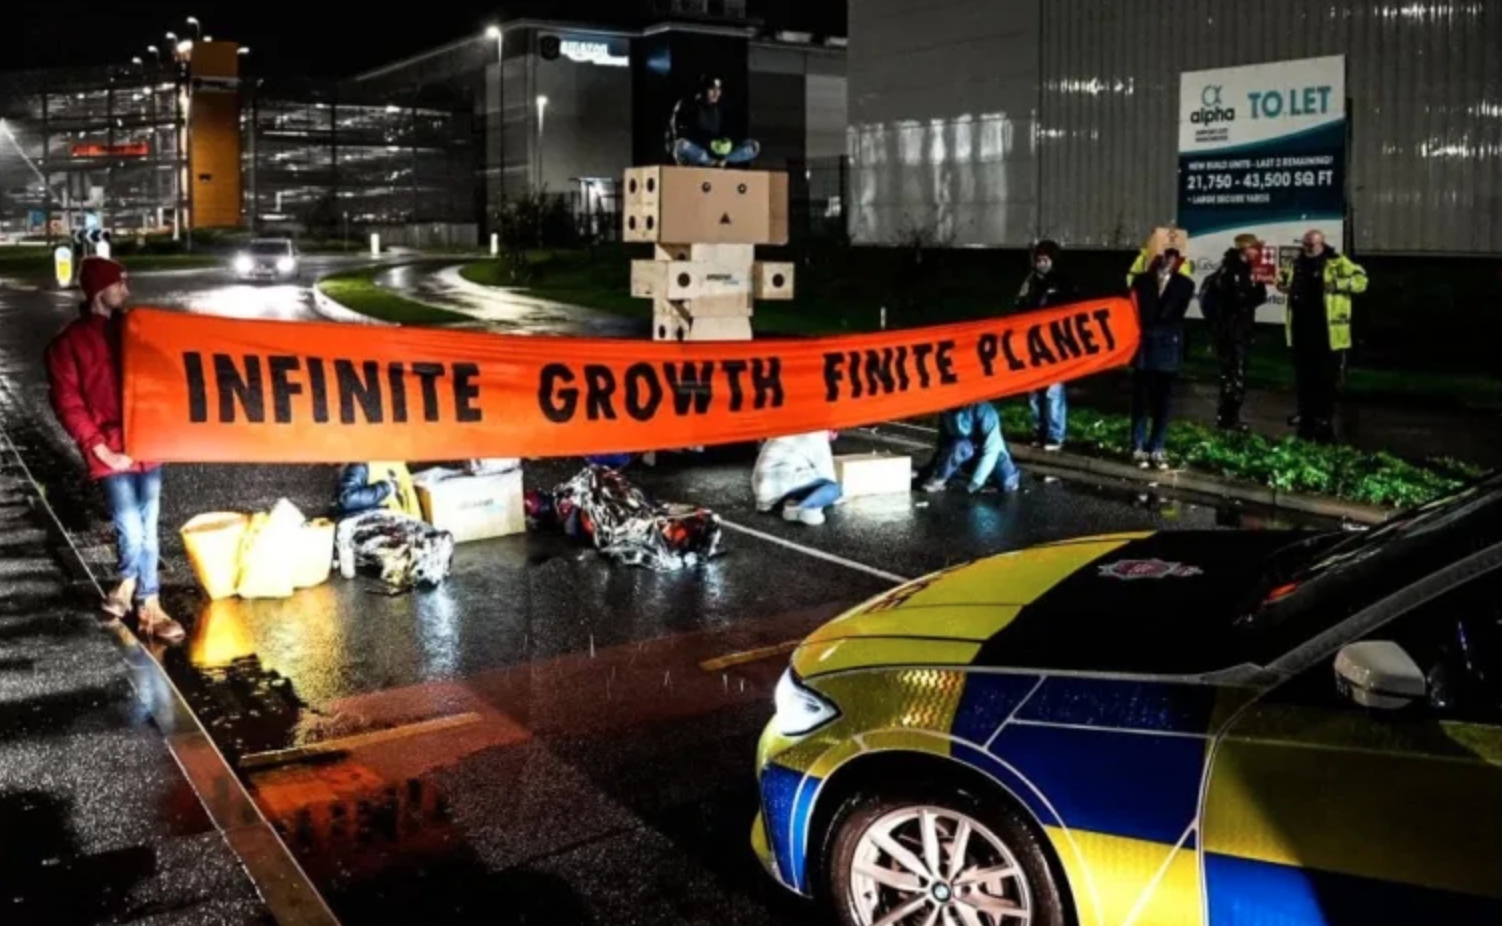 Extinction Rebellion block Amazon warehouse in Manchester for Black Friday protests, The Manc